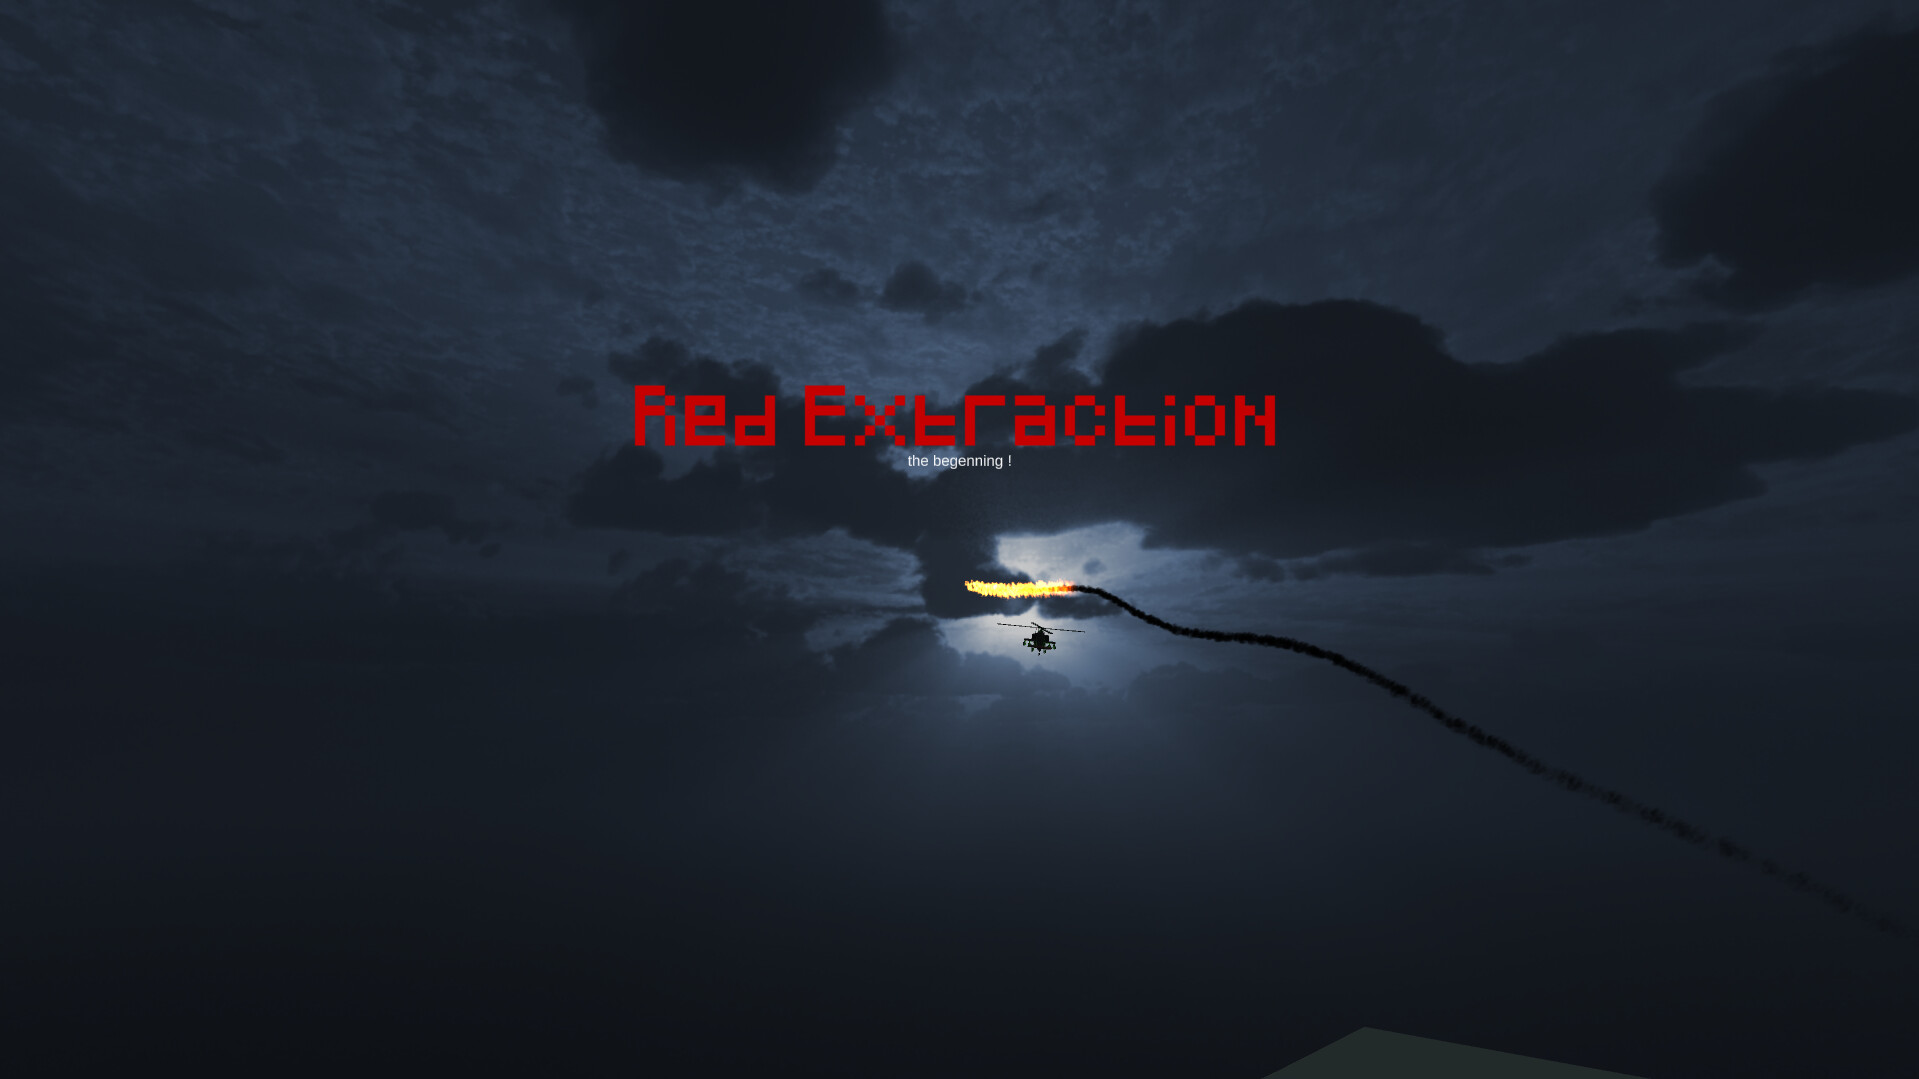 ArtStation - Red Extraction [FPS Stealth Shooter Game: PC]